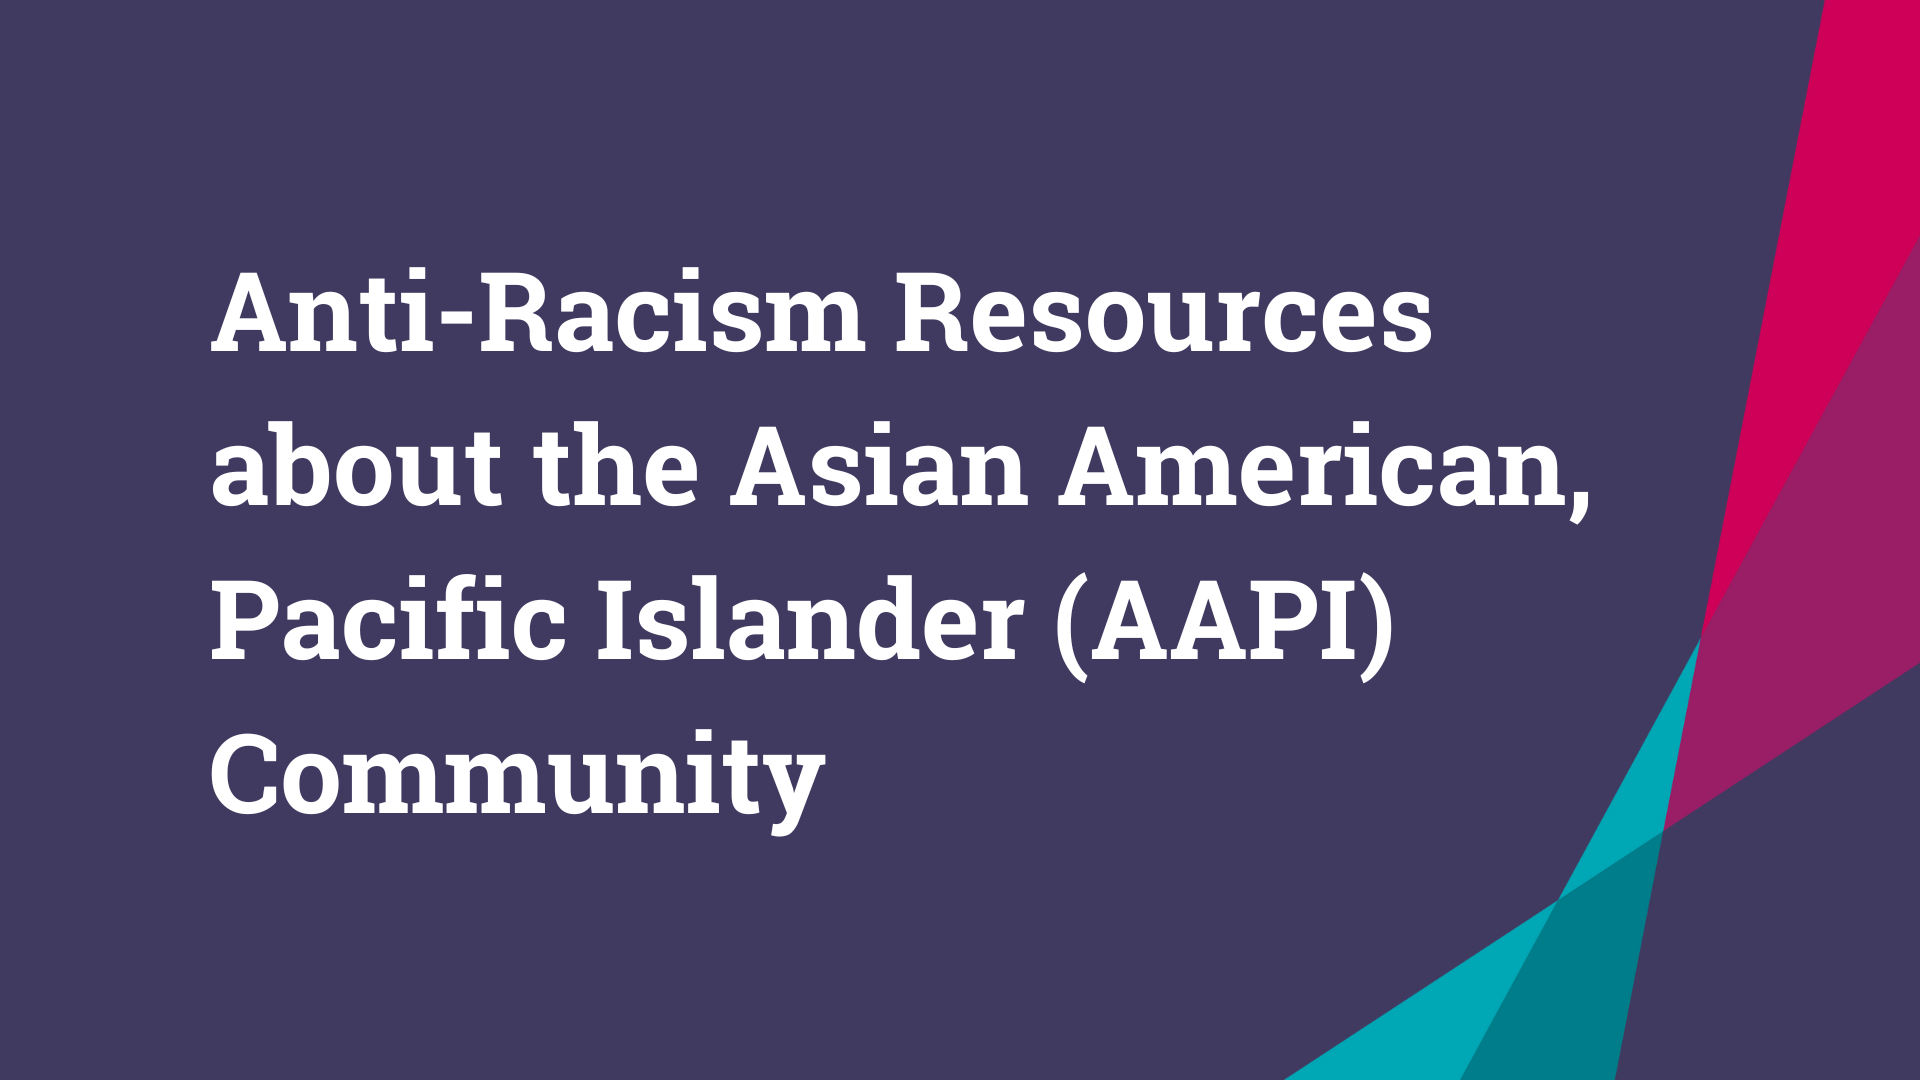 Anti-Racism Resources for AAPI